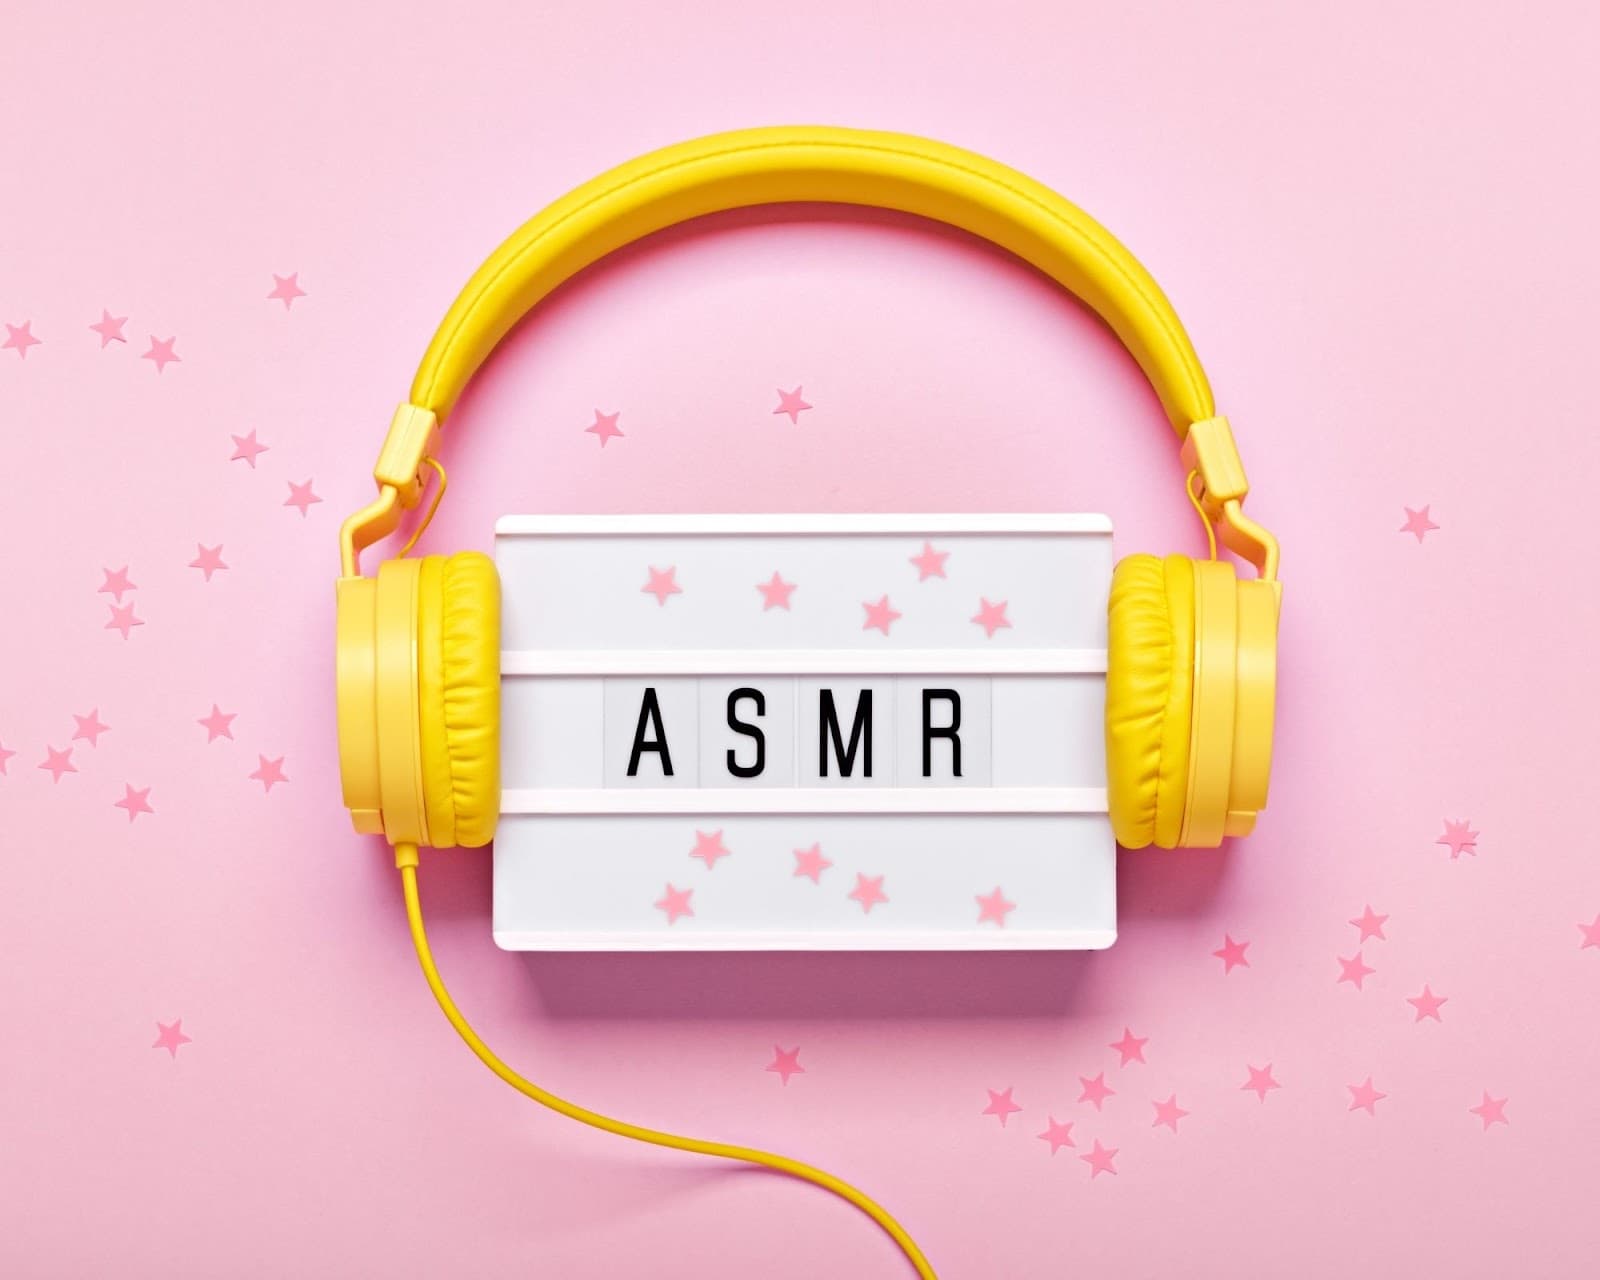 ASMR: Does It Truly Help You Relax?